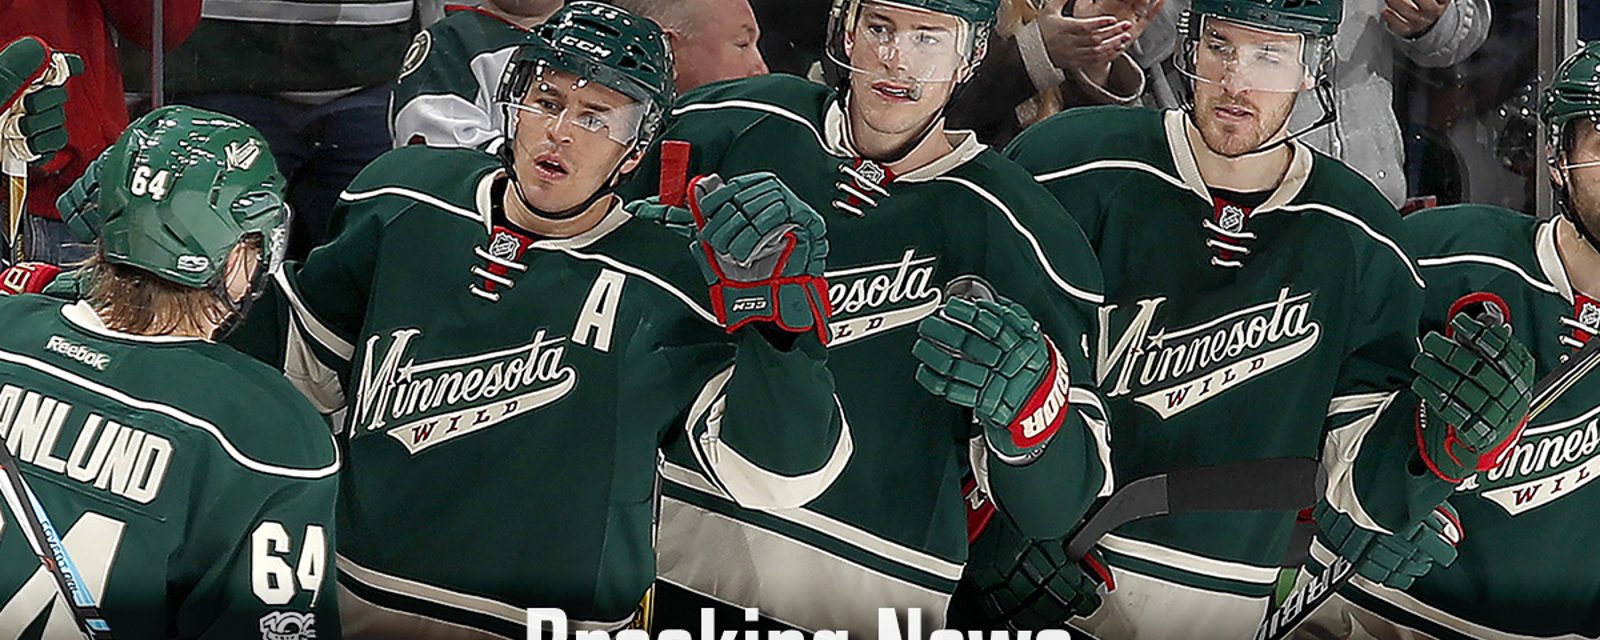 Breaking News : Wild sign Veteran forward on a tryout deal.